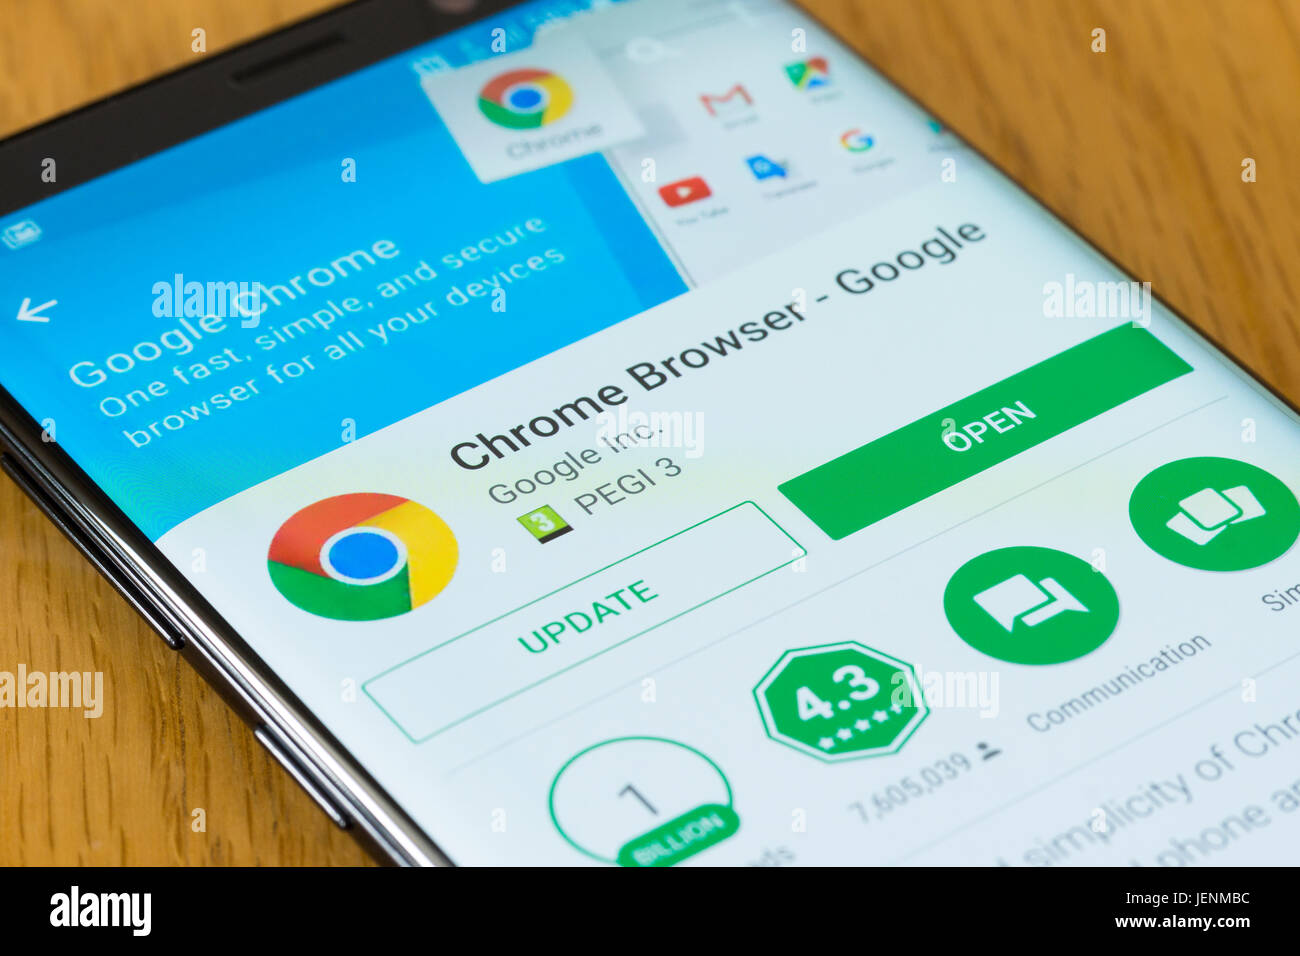 A closeup of the Google Chrome Browser app install screen on a smartphone Stock Photo